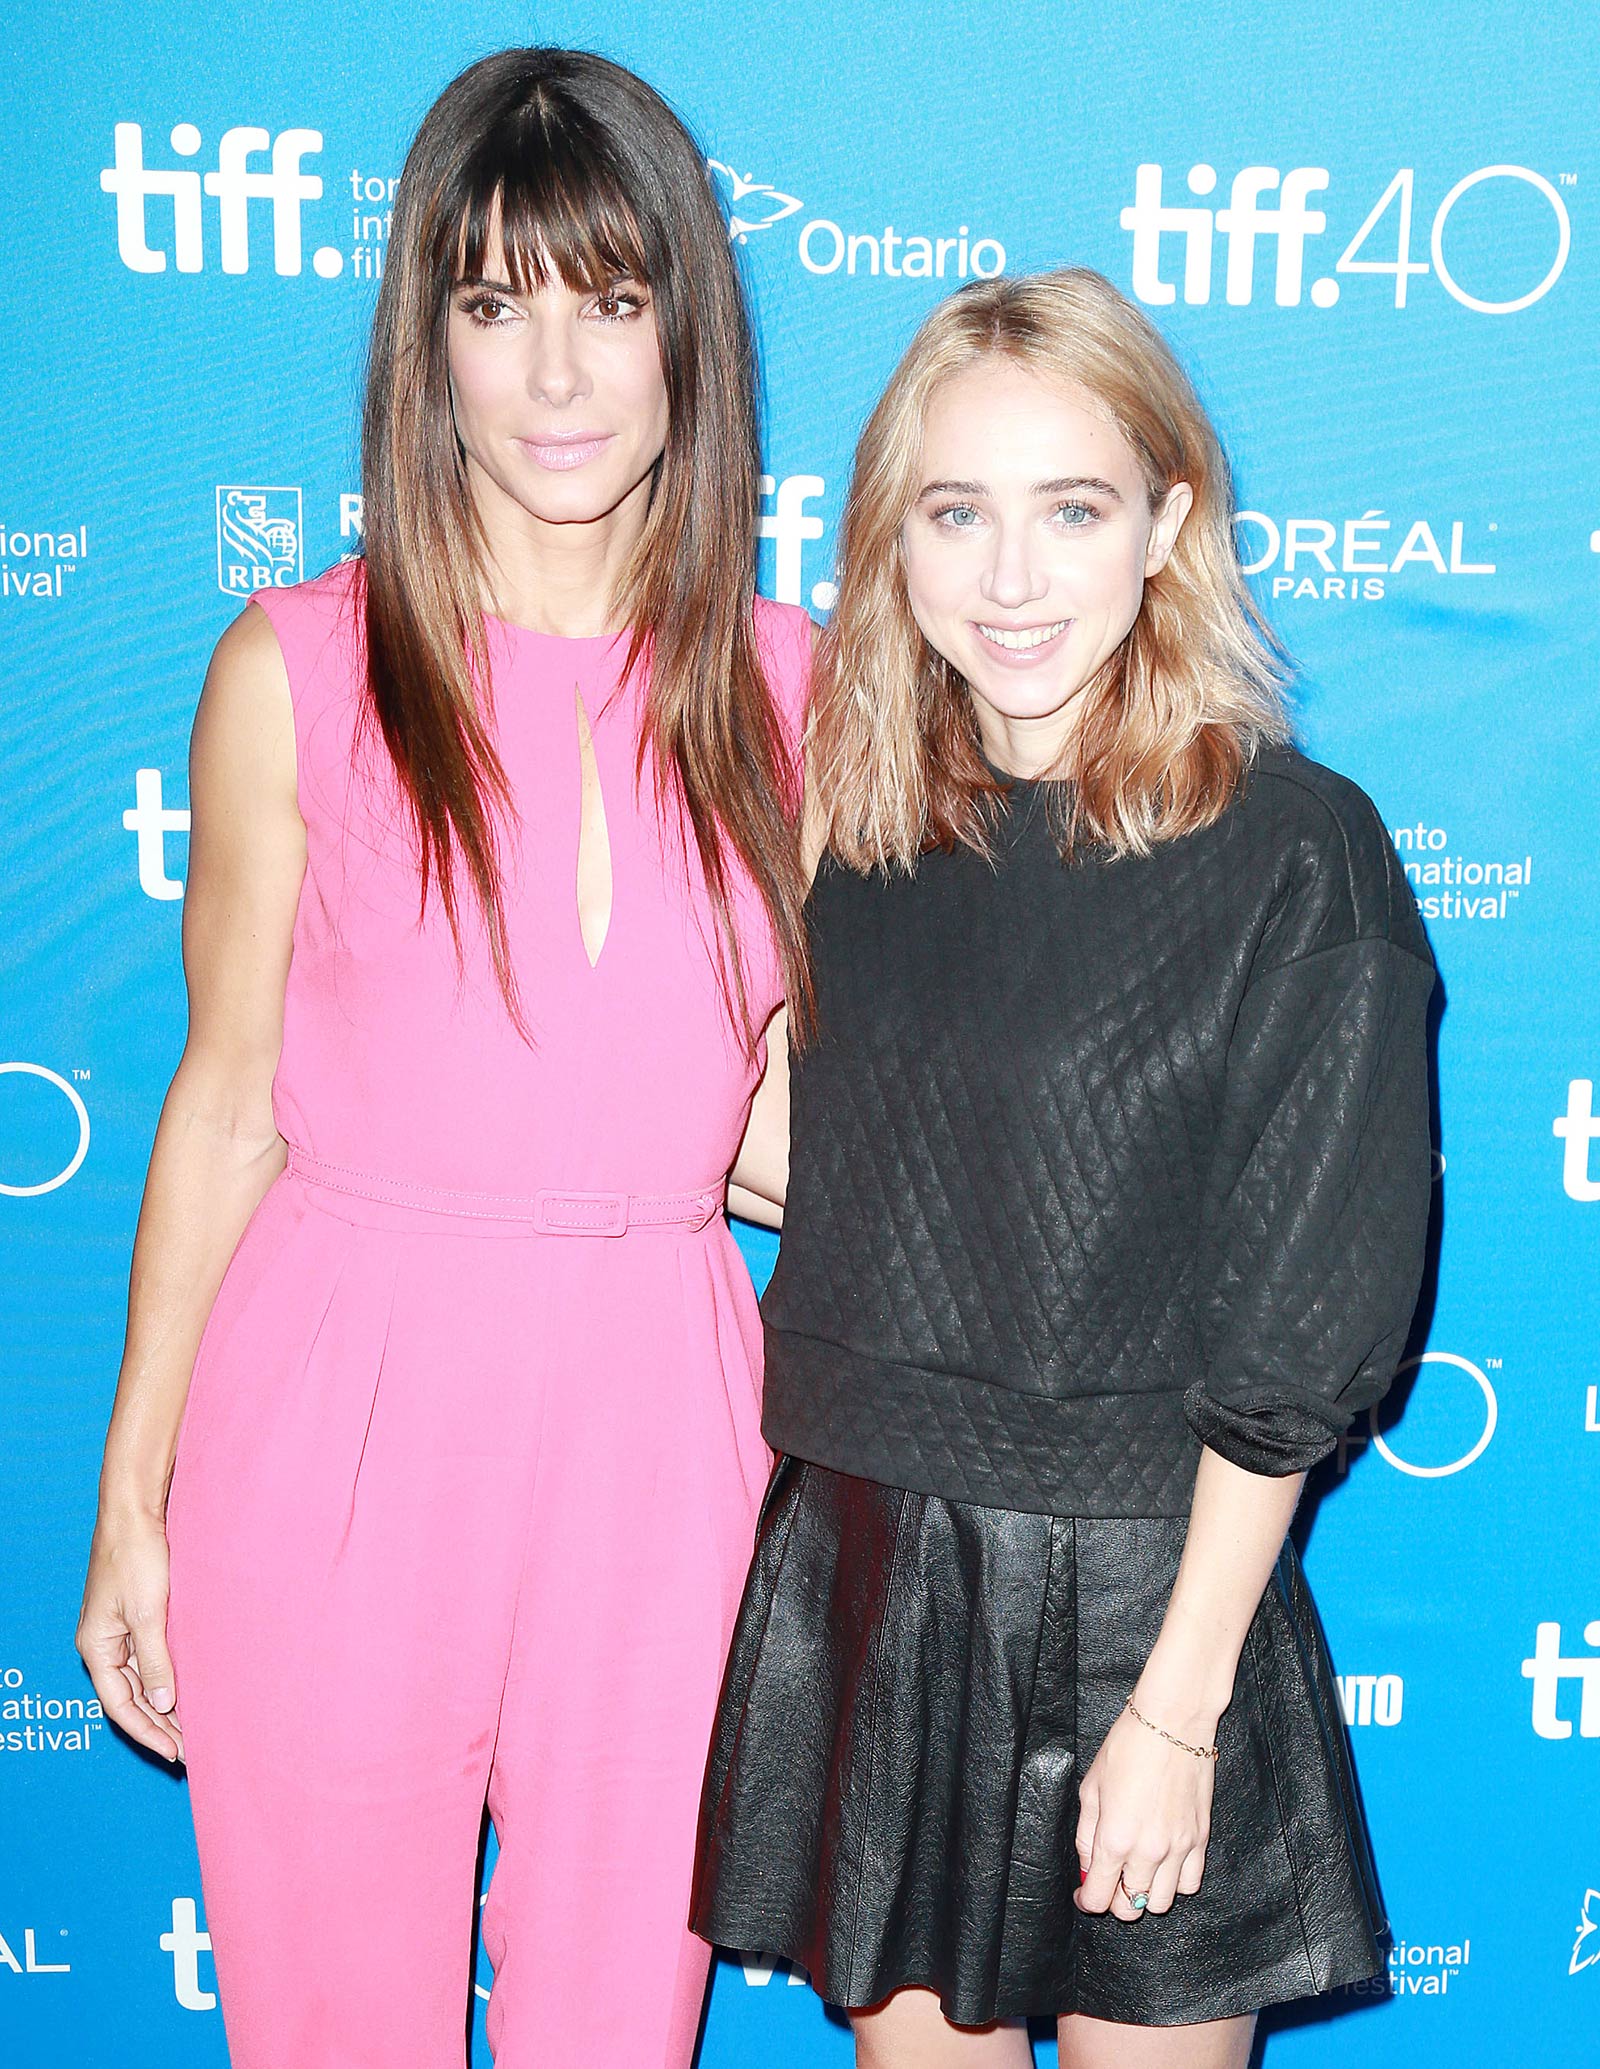 Zoe Kazan attends the Our Brand Is Crisis press conference